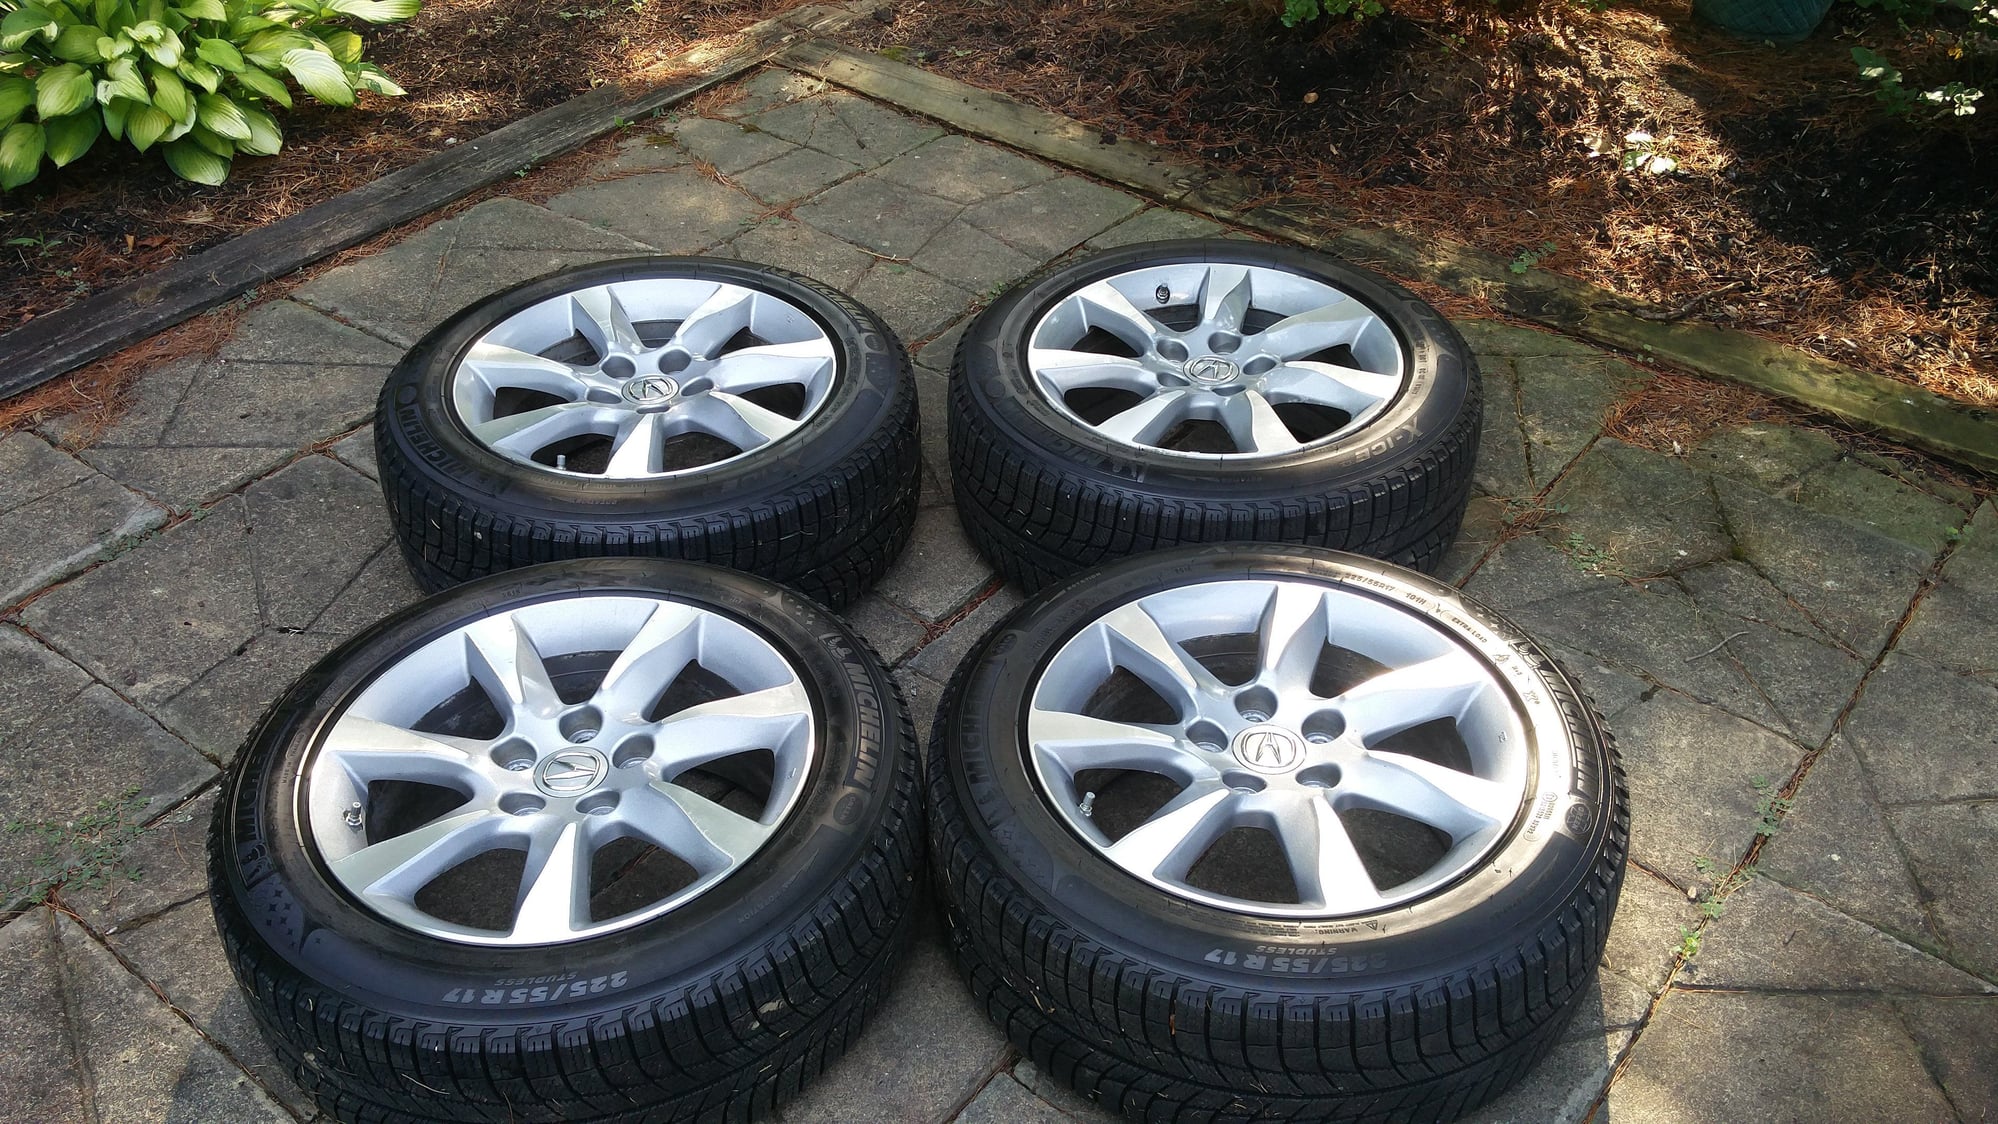 Wheels and Tires/Axles - FS: Acura TL/Honda OEM 17x8 Wheels TPMS&225/55/17 Michelin X-IceXI3Winter tires 5X120 - Used - Indianapolis, IN 46220, United States